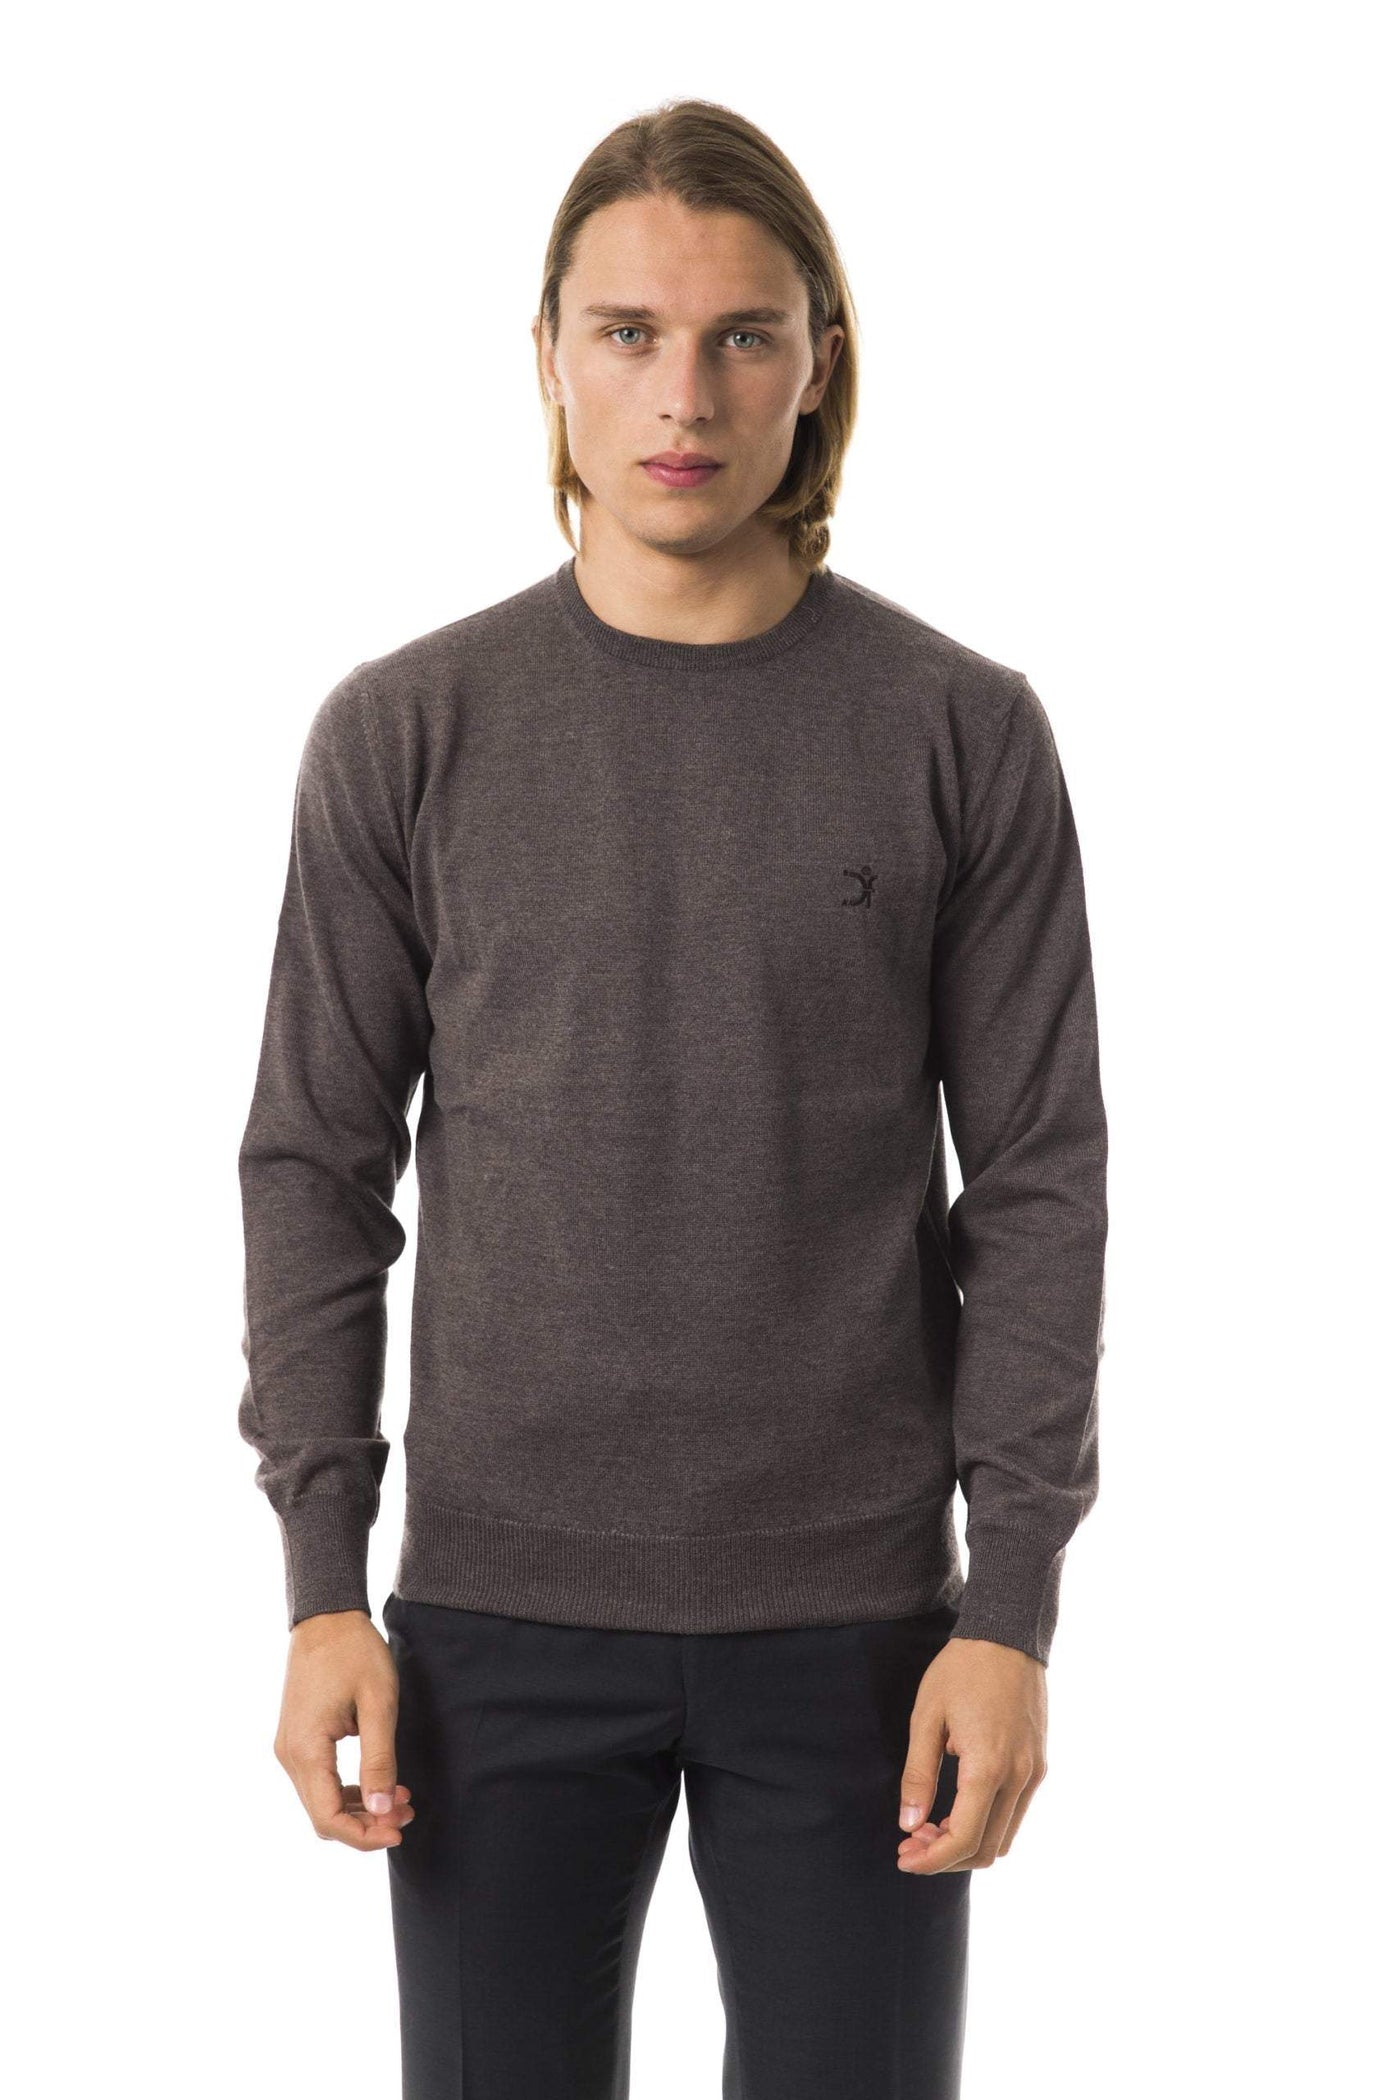 Uominitaliani emboidered  crew neck Sweater #men, feed-color-Gray, feed-gender-adult, feed-gender-male, Gray, L, Sweaters - Men - Clothing, Uominitaliani, XL, XXL at SEYMAYKA